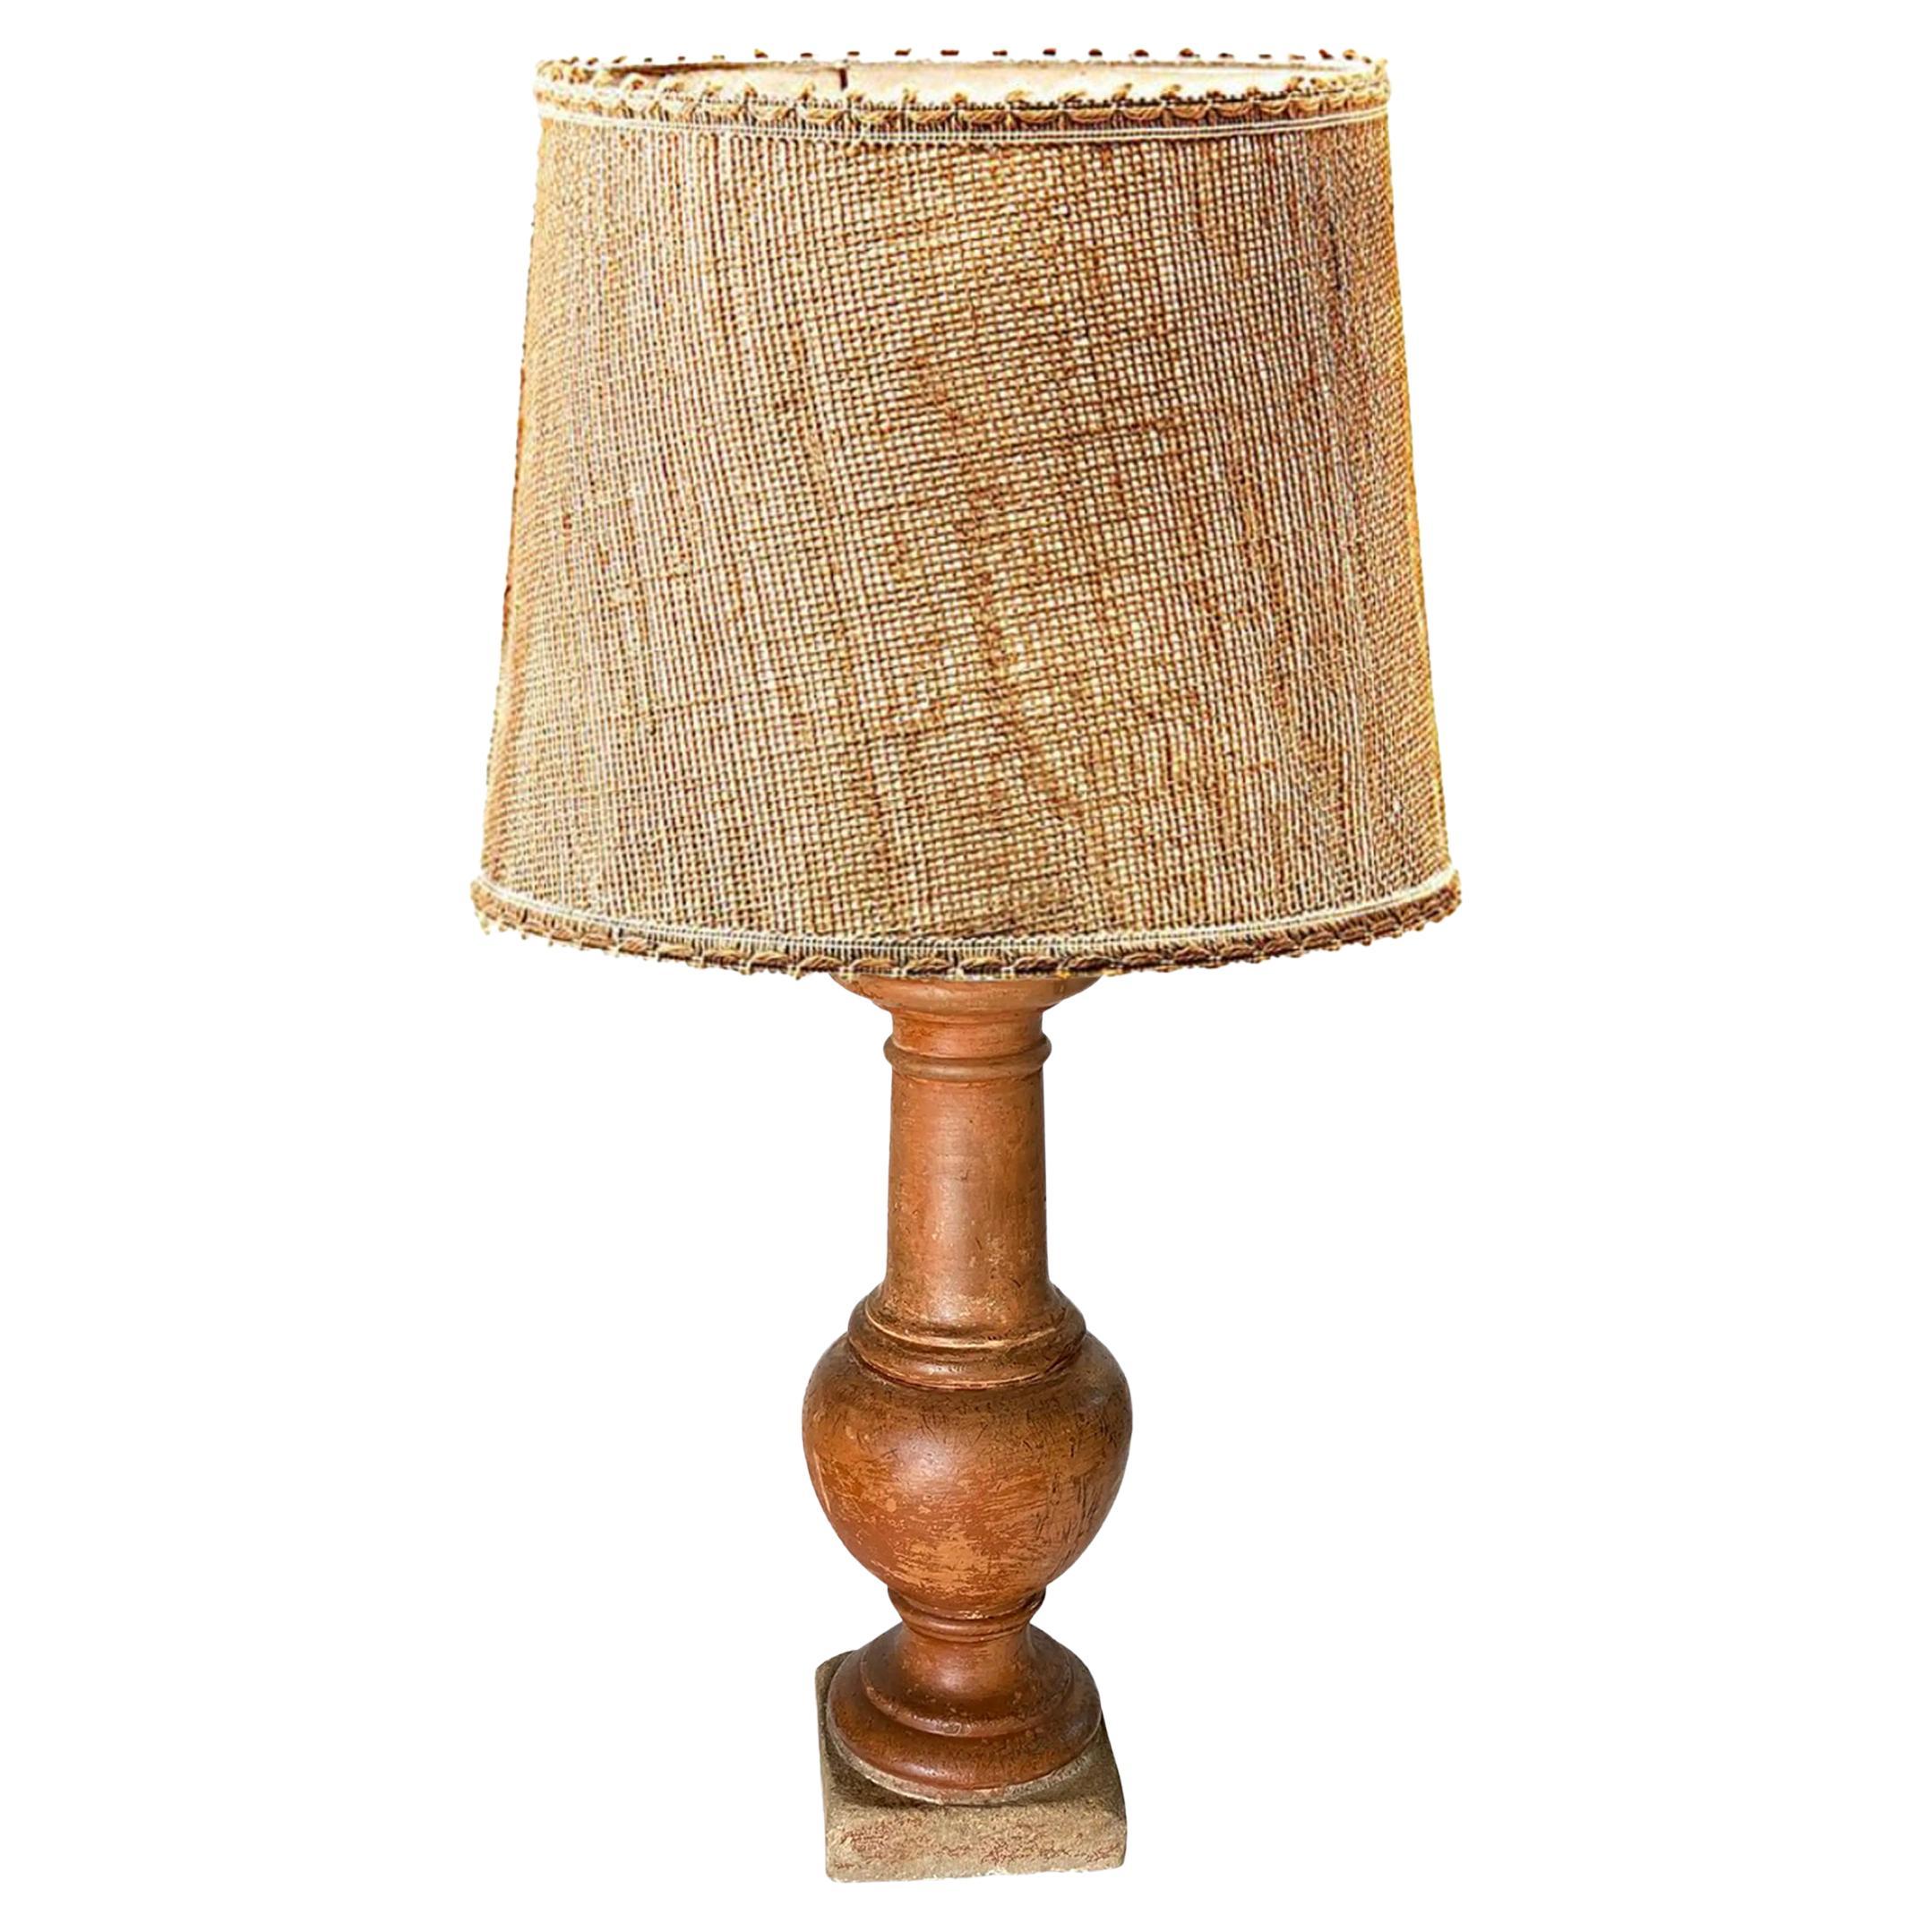 Tall French Neoclassical Terracotta Baluster Lamp, Brown Color, 19th Century For Sale